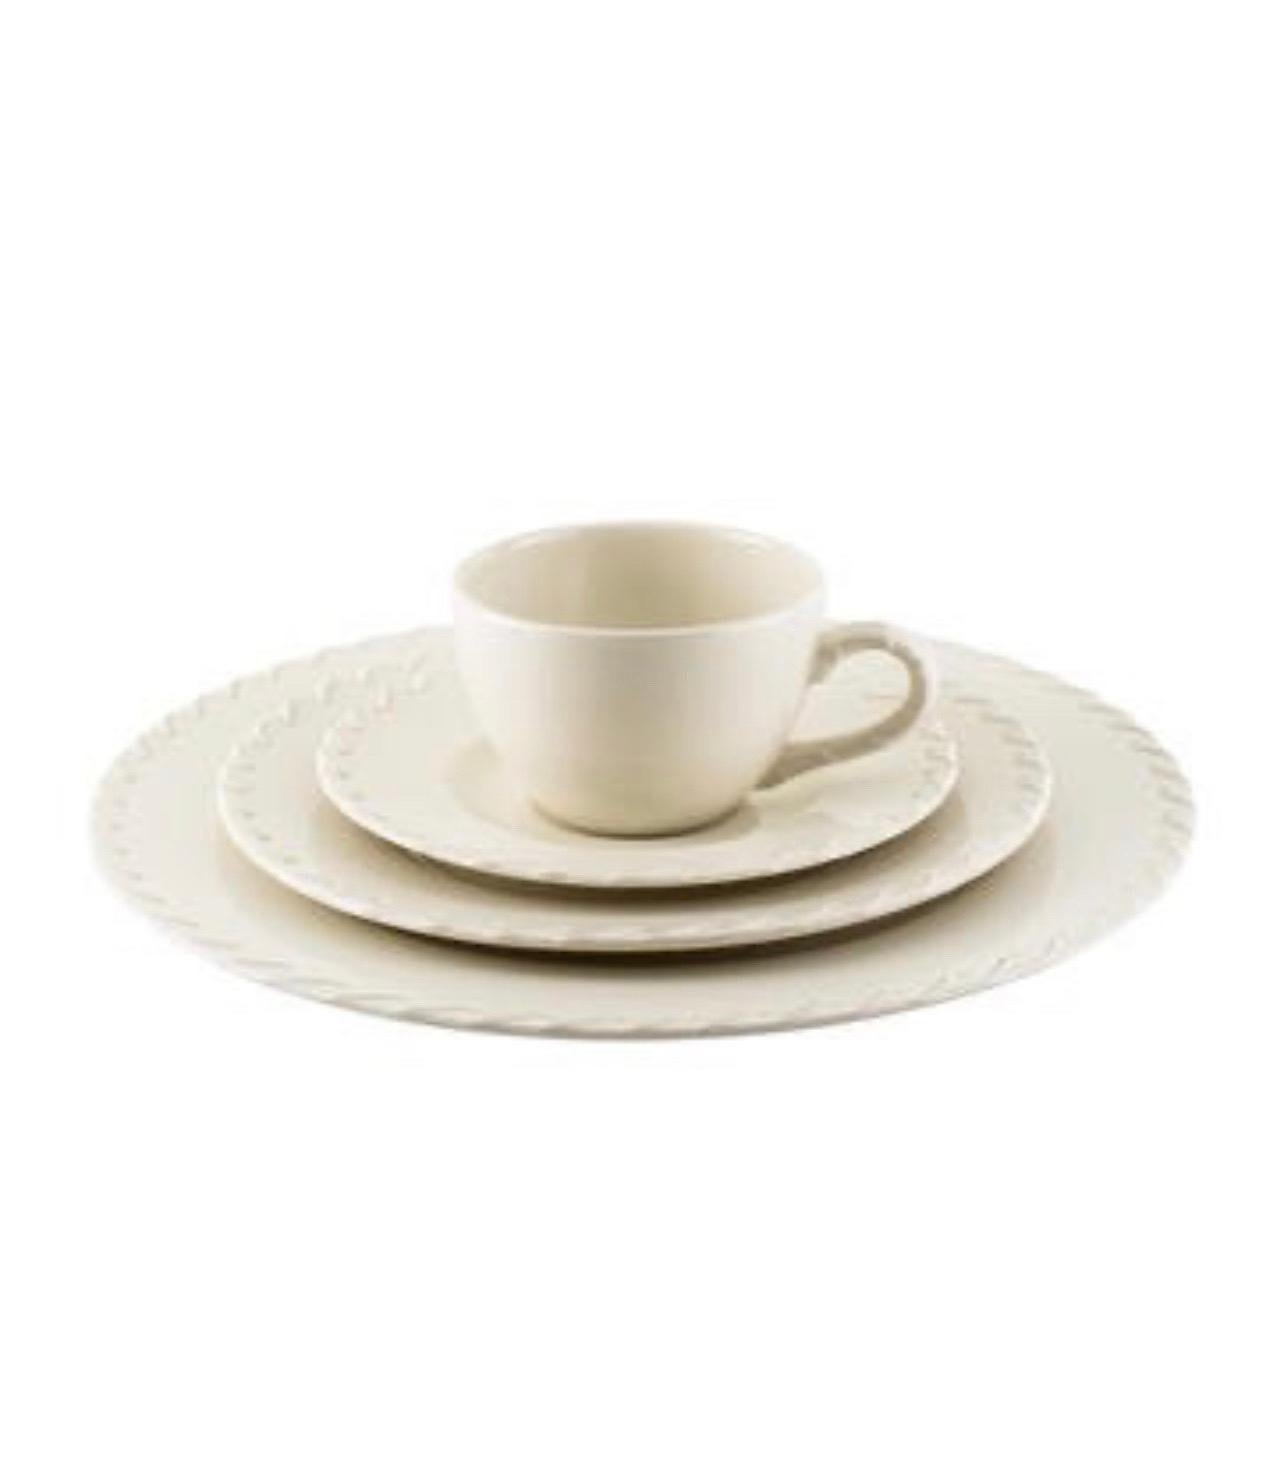 A set of 8 place settings consisting of 32 pieces in the Canyon Road pattern by Ralph Lauren Home.

Made in England, circa 1999-2001.

Features a cream color with whip-stitch pattern and branded mark at undersides. 

Includes the following 32